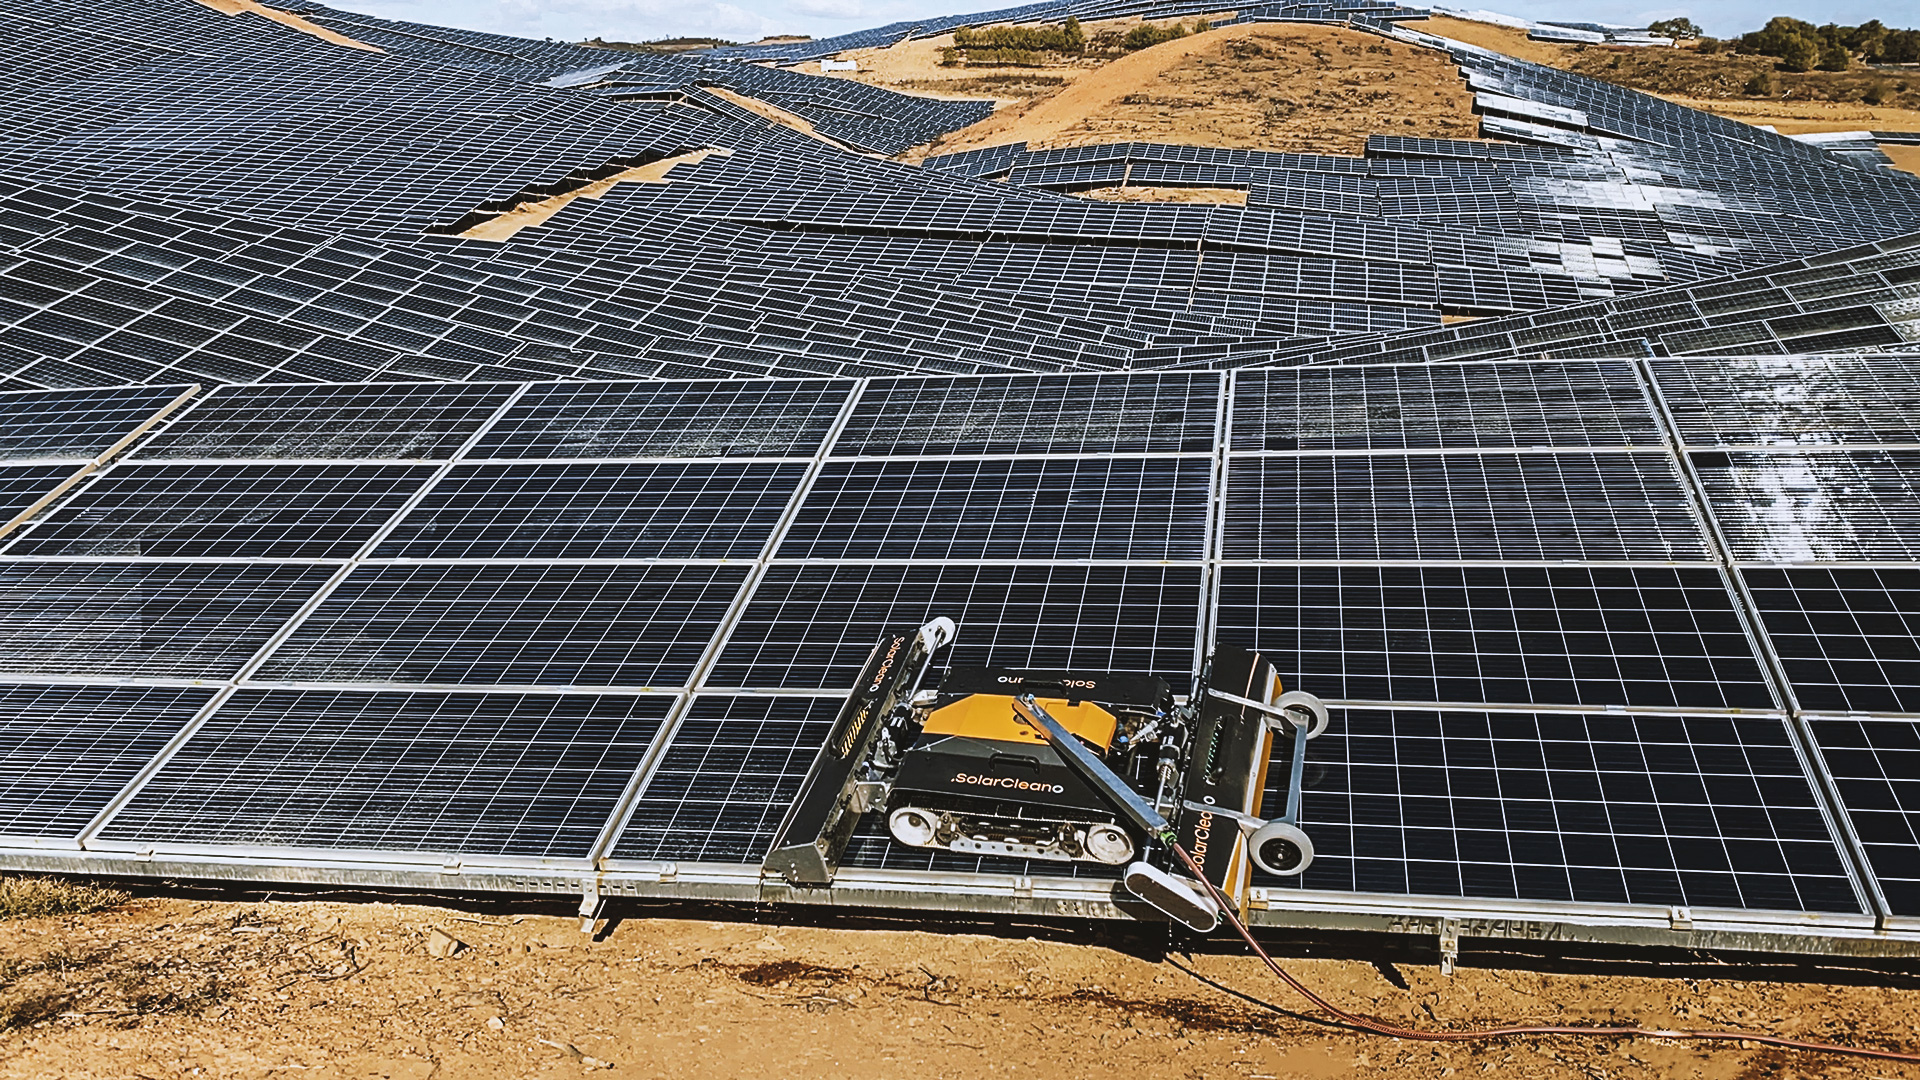 robotic waterless cleaning solar smart tracker with SolarCleano in dry areas